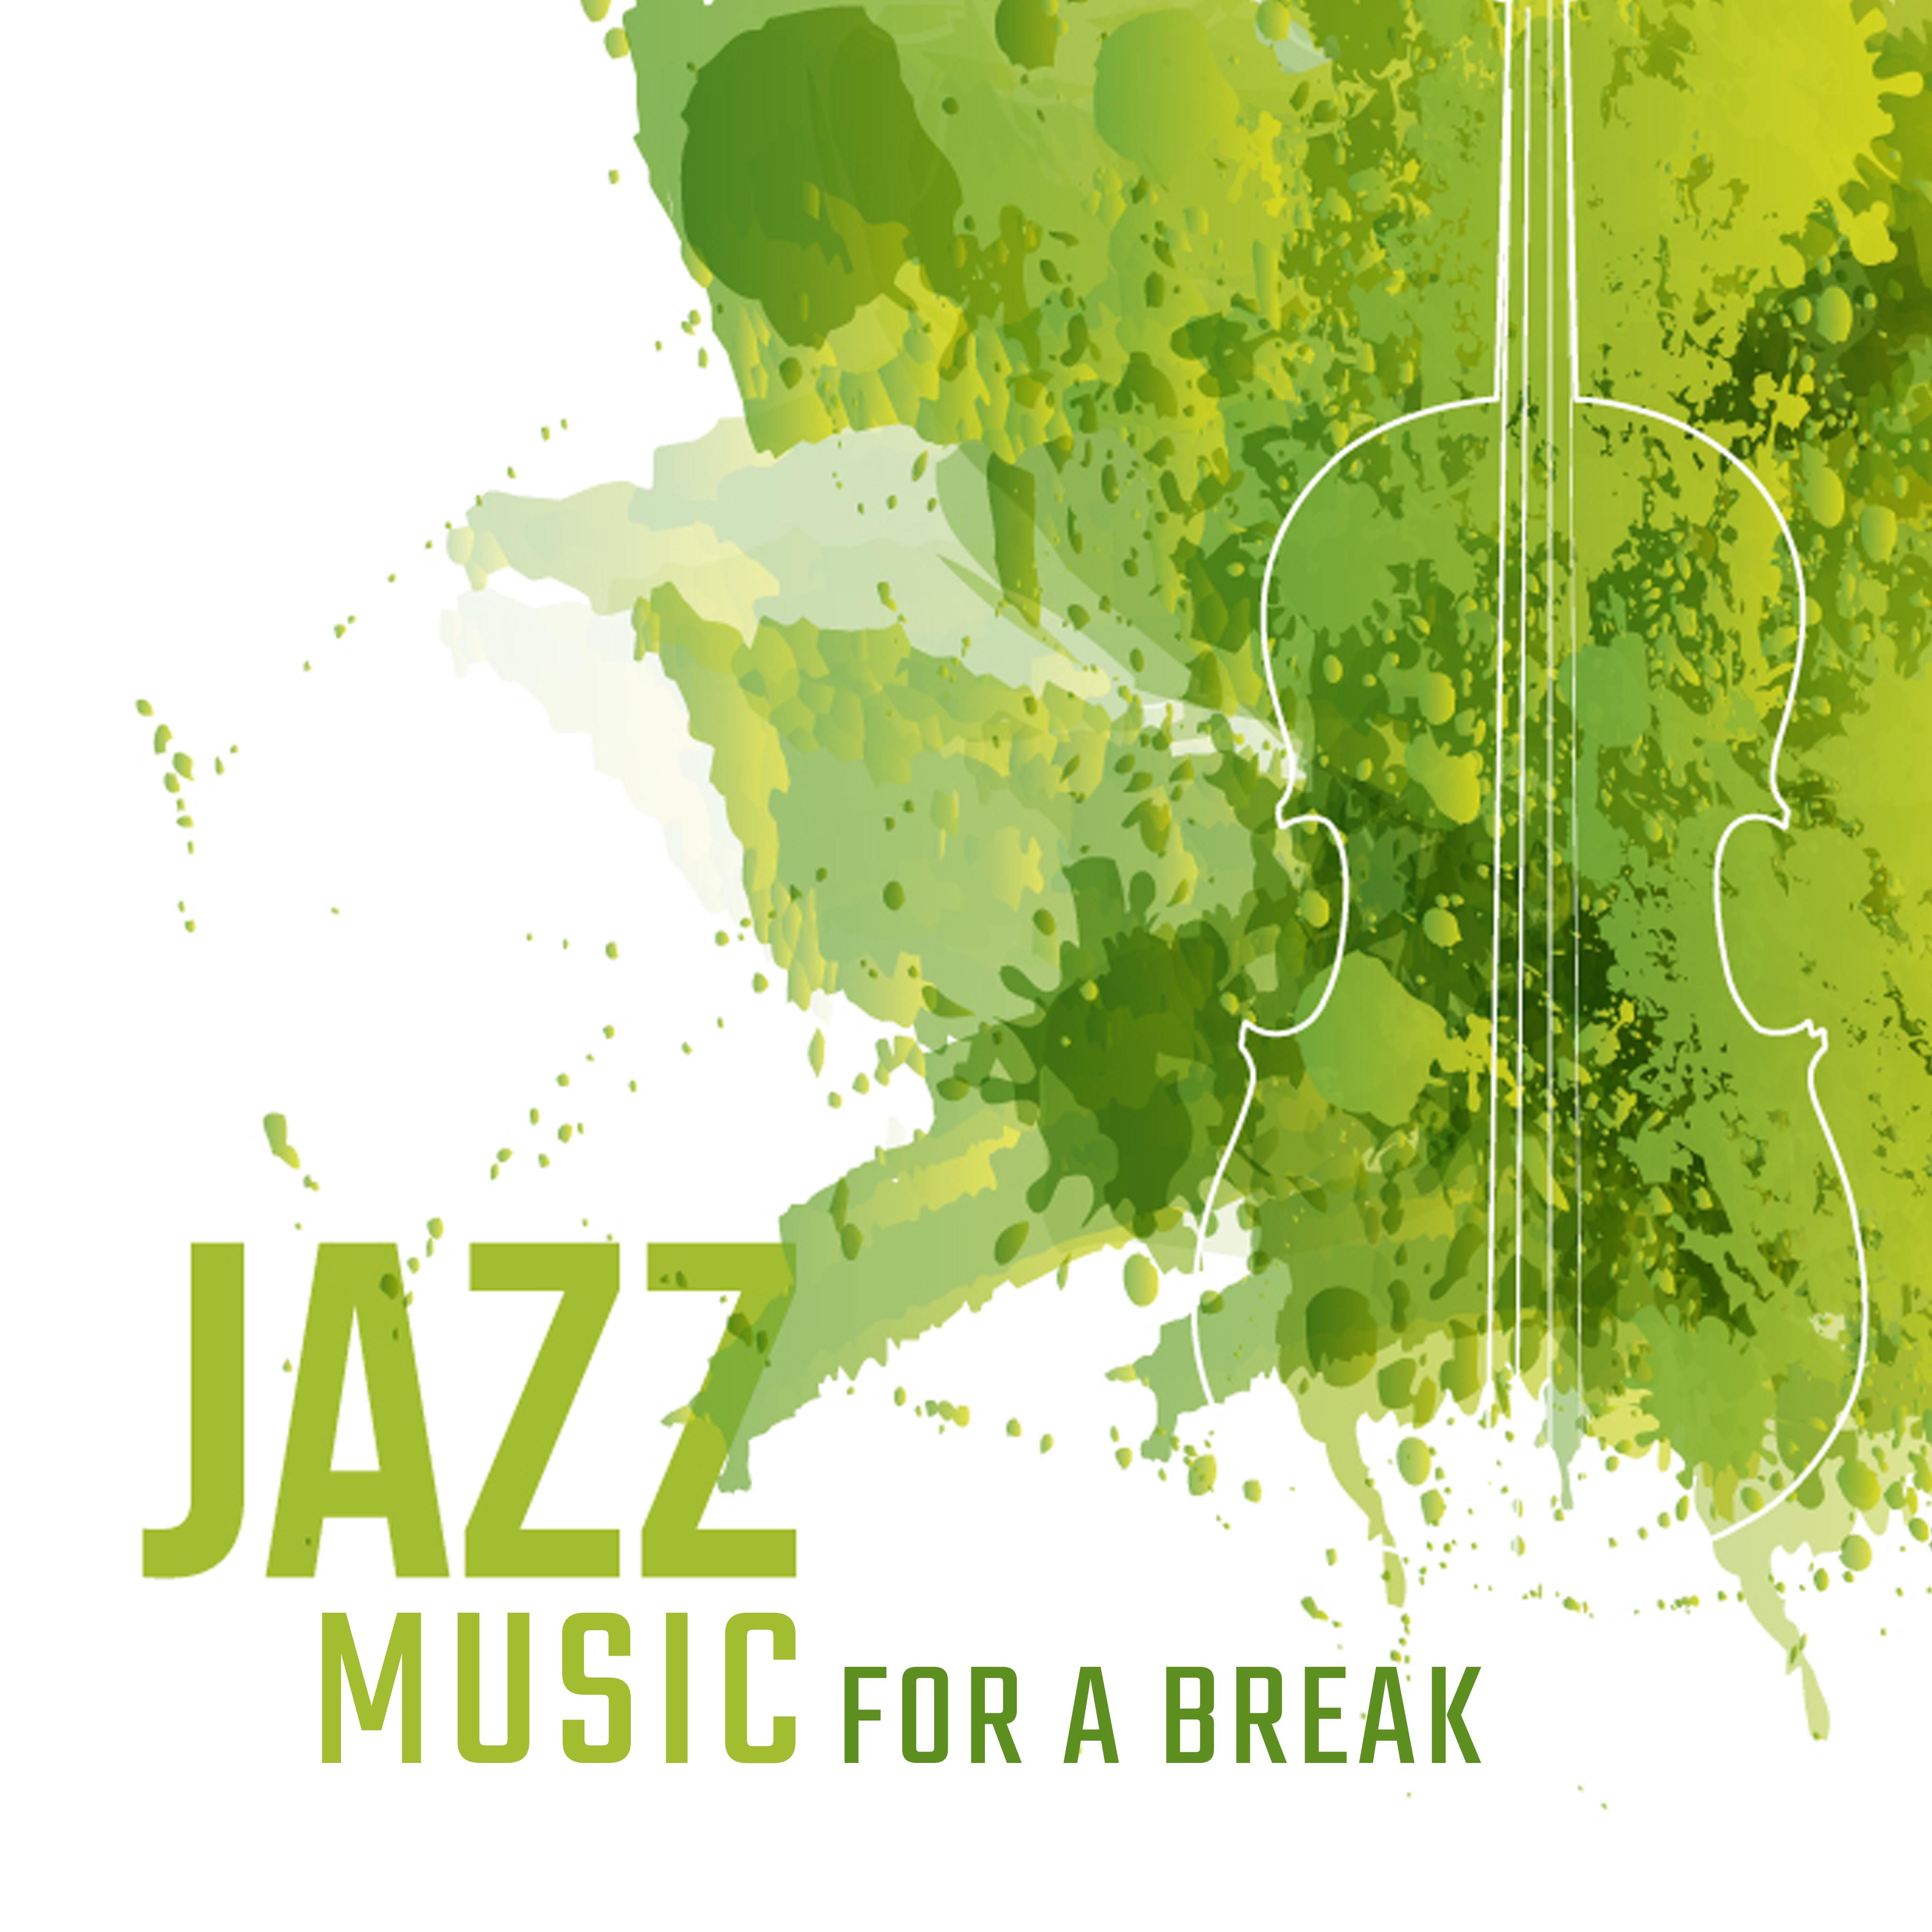 Jazz Music for a Break: Swing Tracks for a Moment of Rest from Work, Study or Daily Home Duties